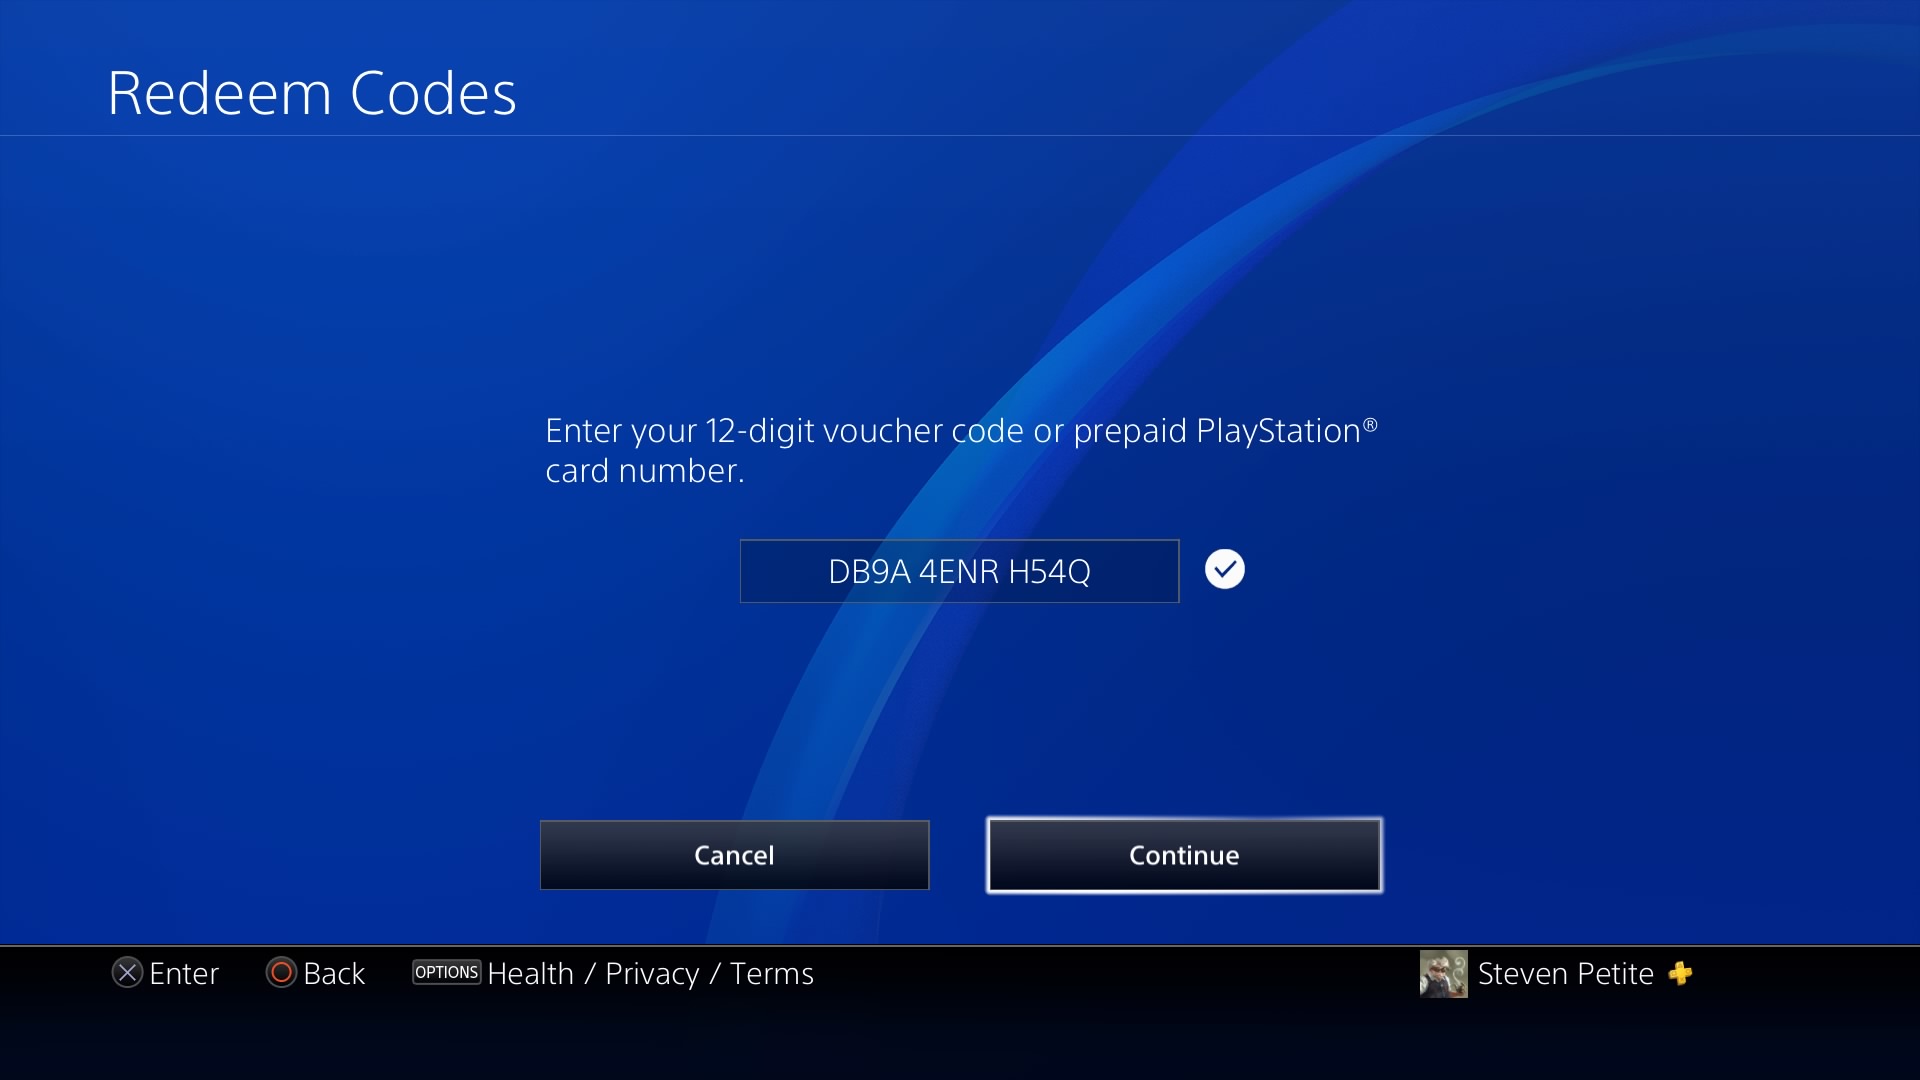 Redeeming Codes on PS4 